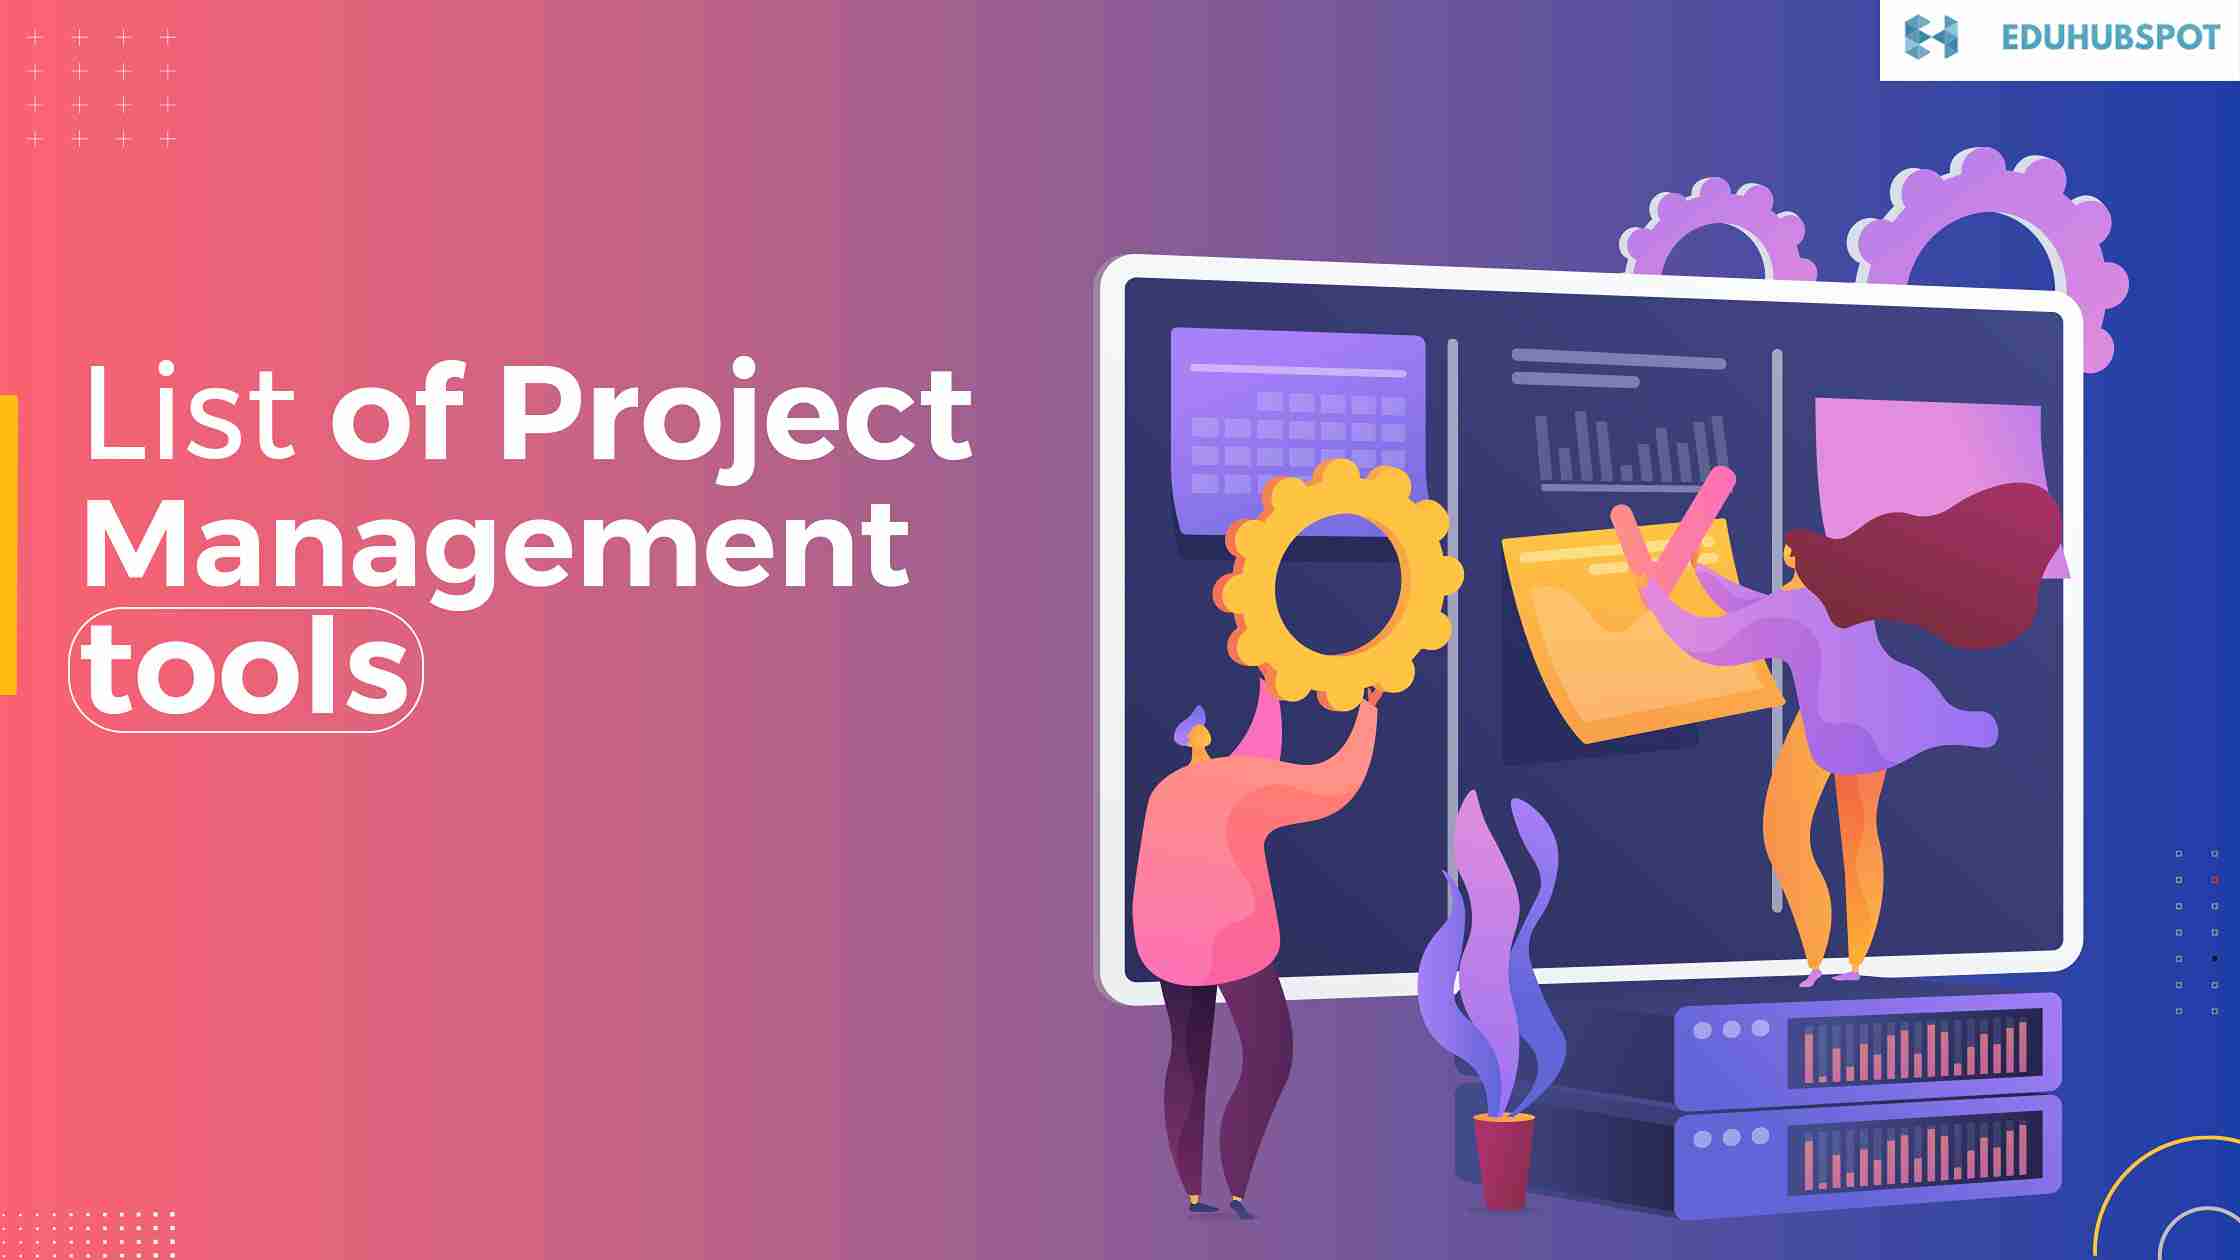 List of Agile Project Management Tools